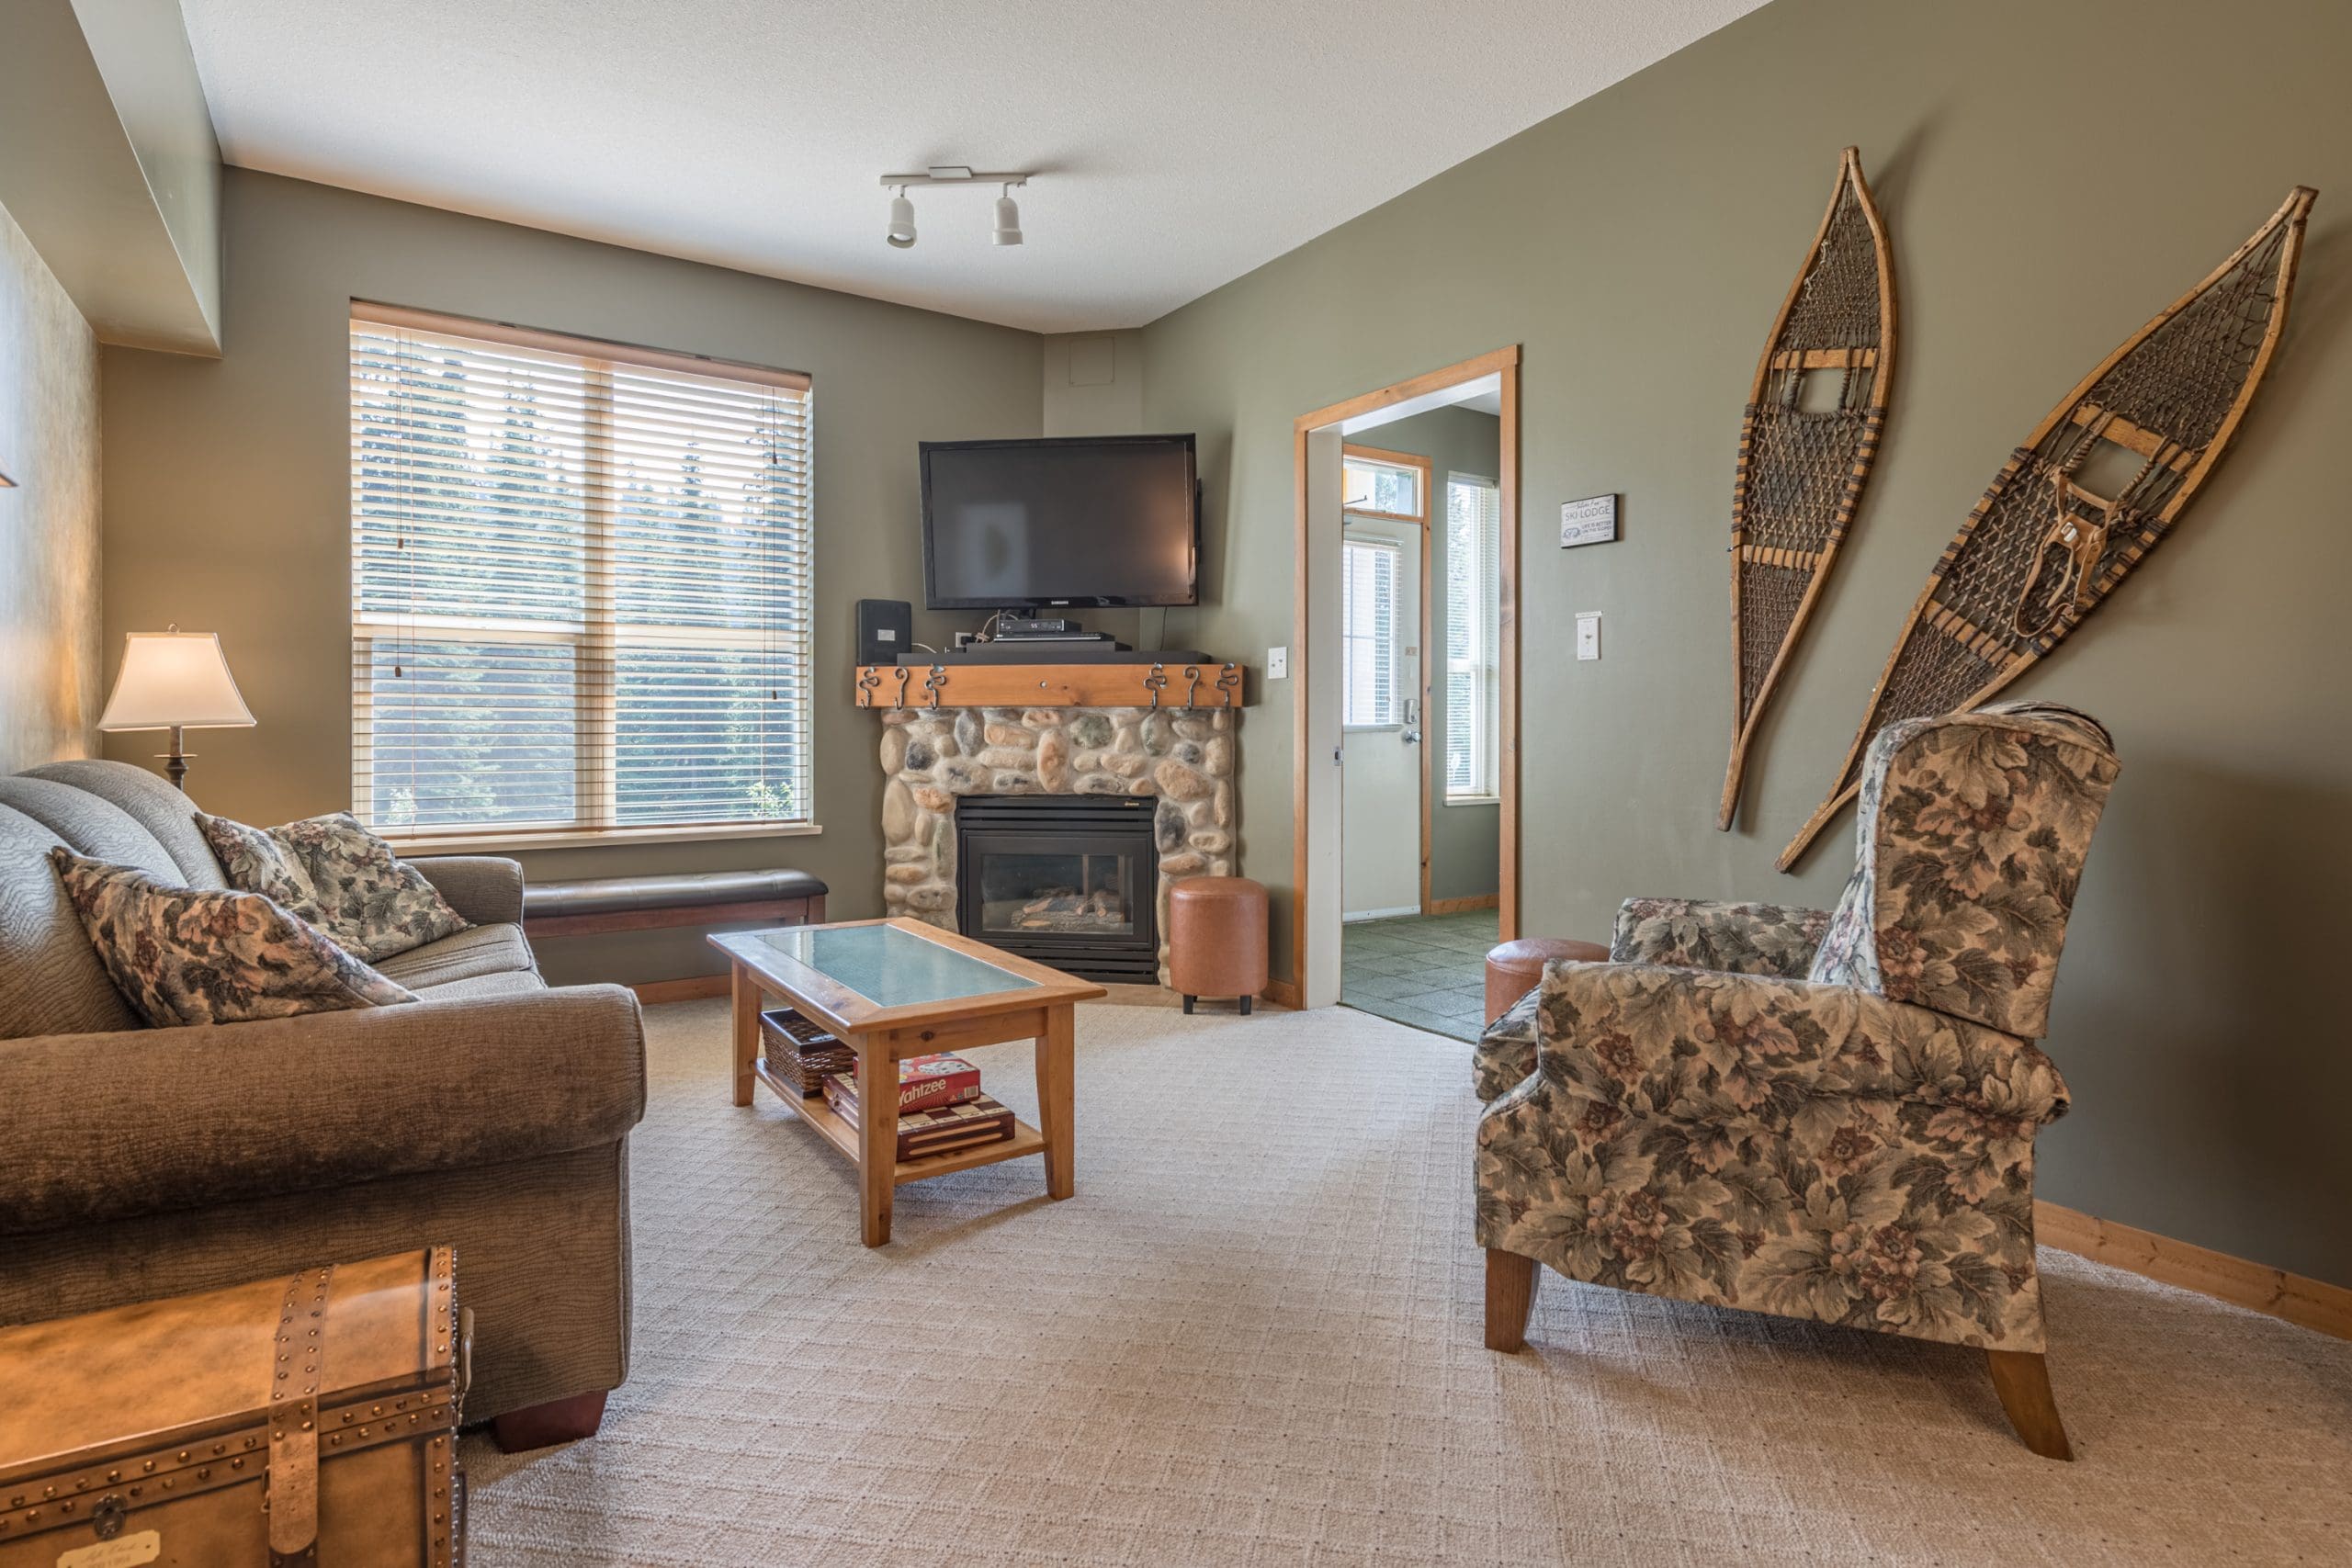 Ground level pet-friendly condo at Creekside. Ski right out from your door to the slopes to start your day. Large entryway for boots and gear, gas fireplace, all brand new appliances and upgrades through unit. New TV's, high-speed WIFI and free parking.